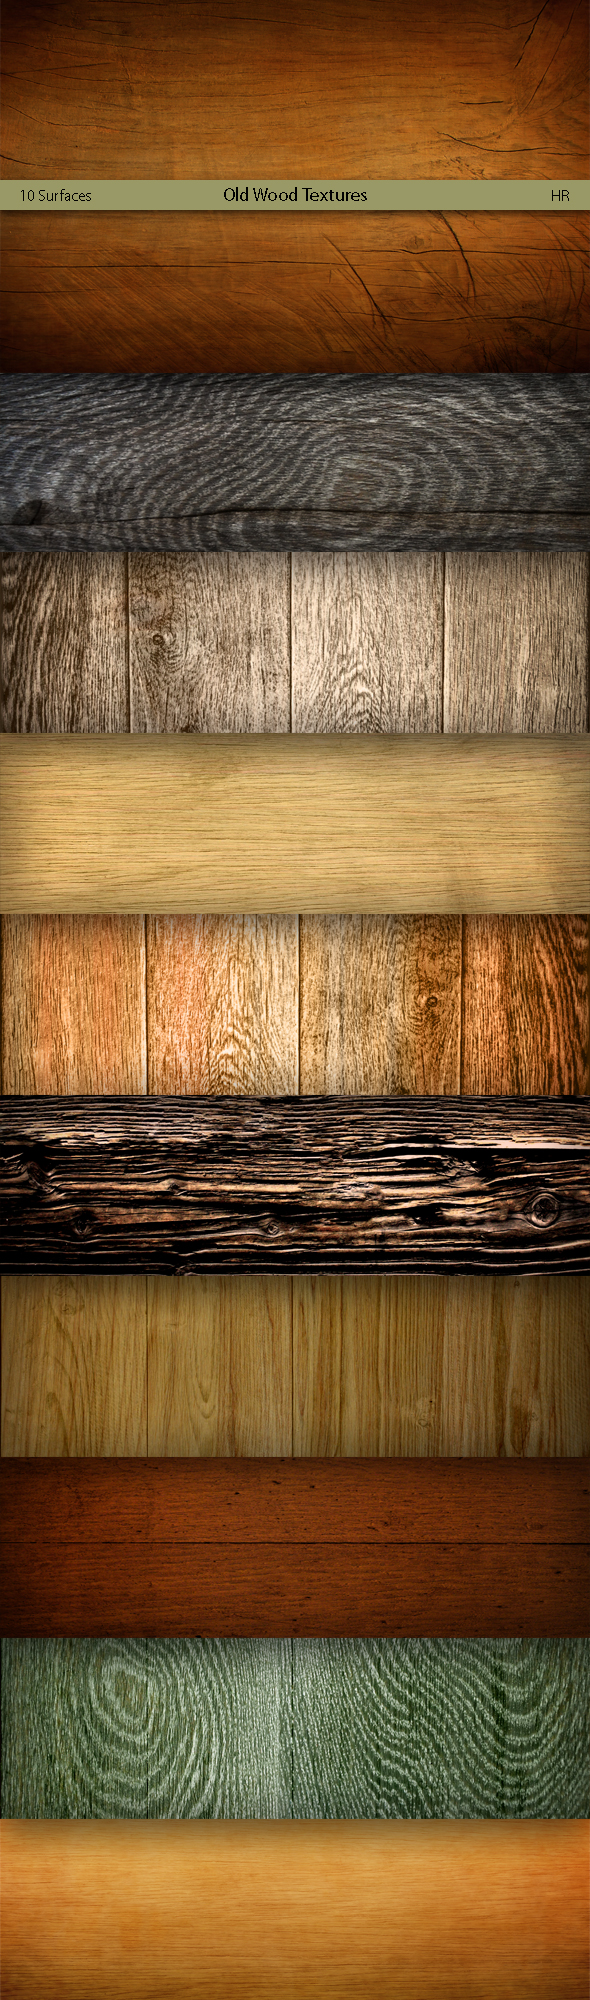 Old Wood Textures 